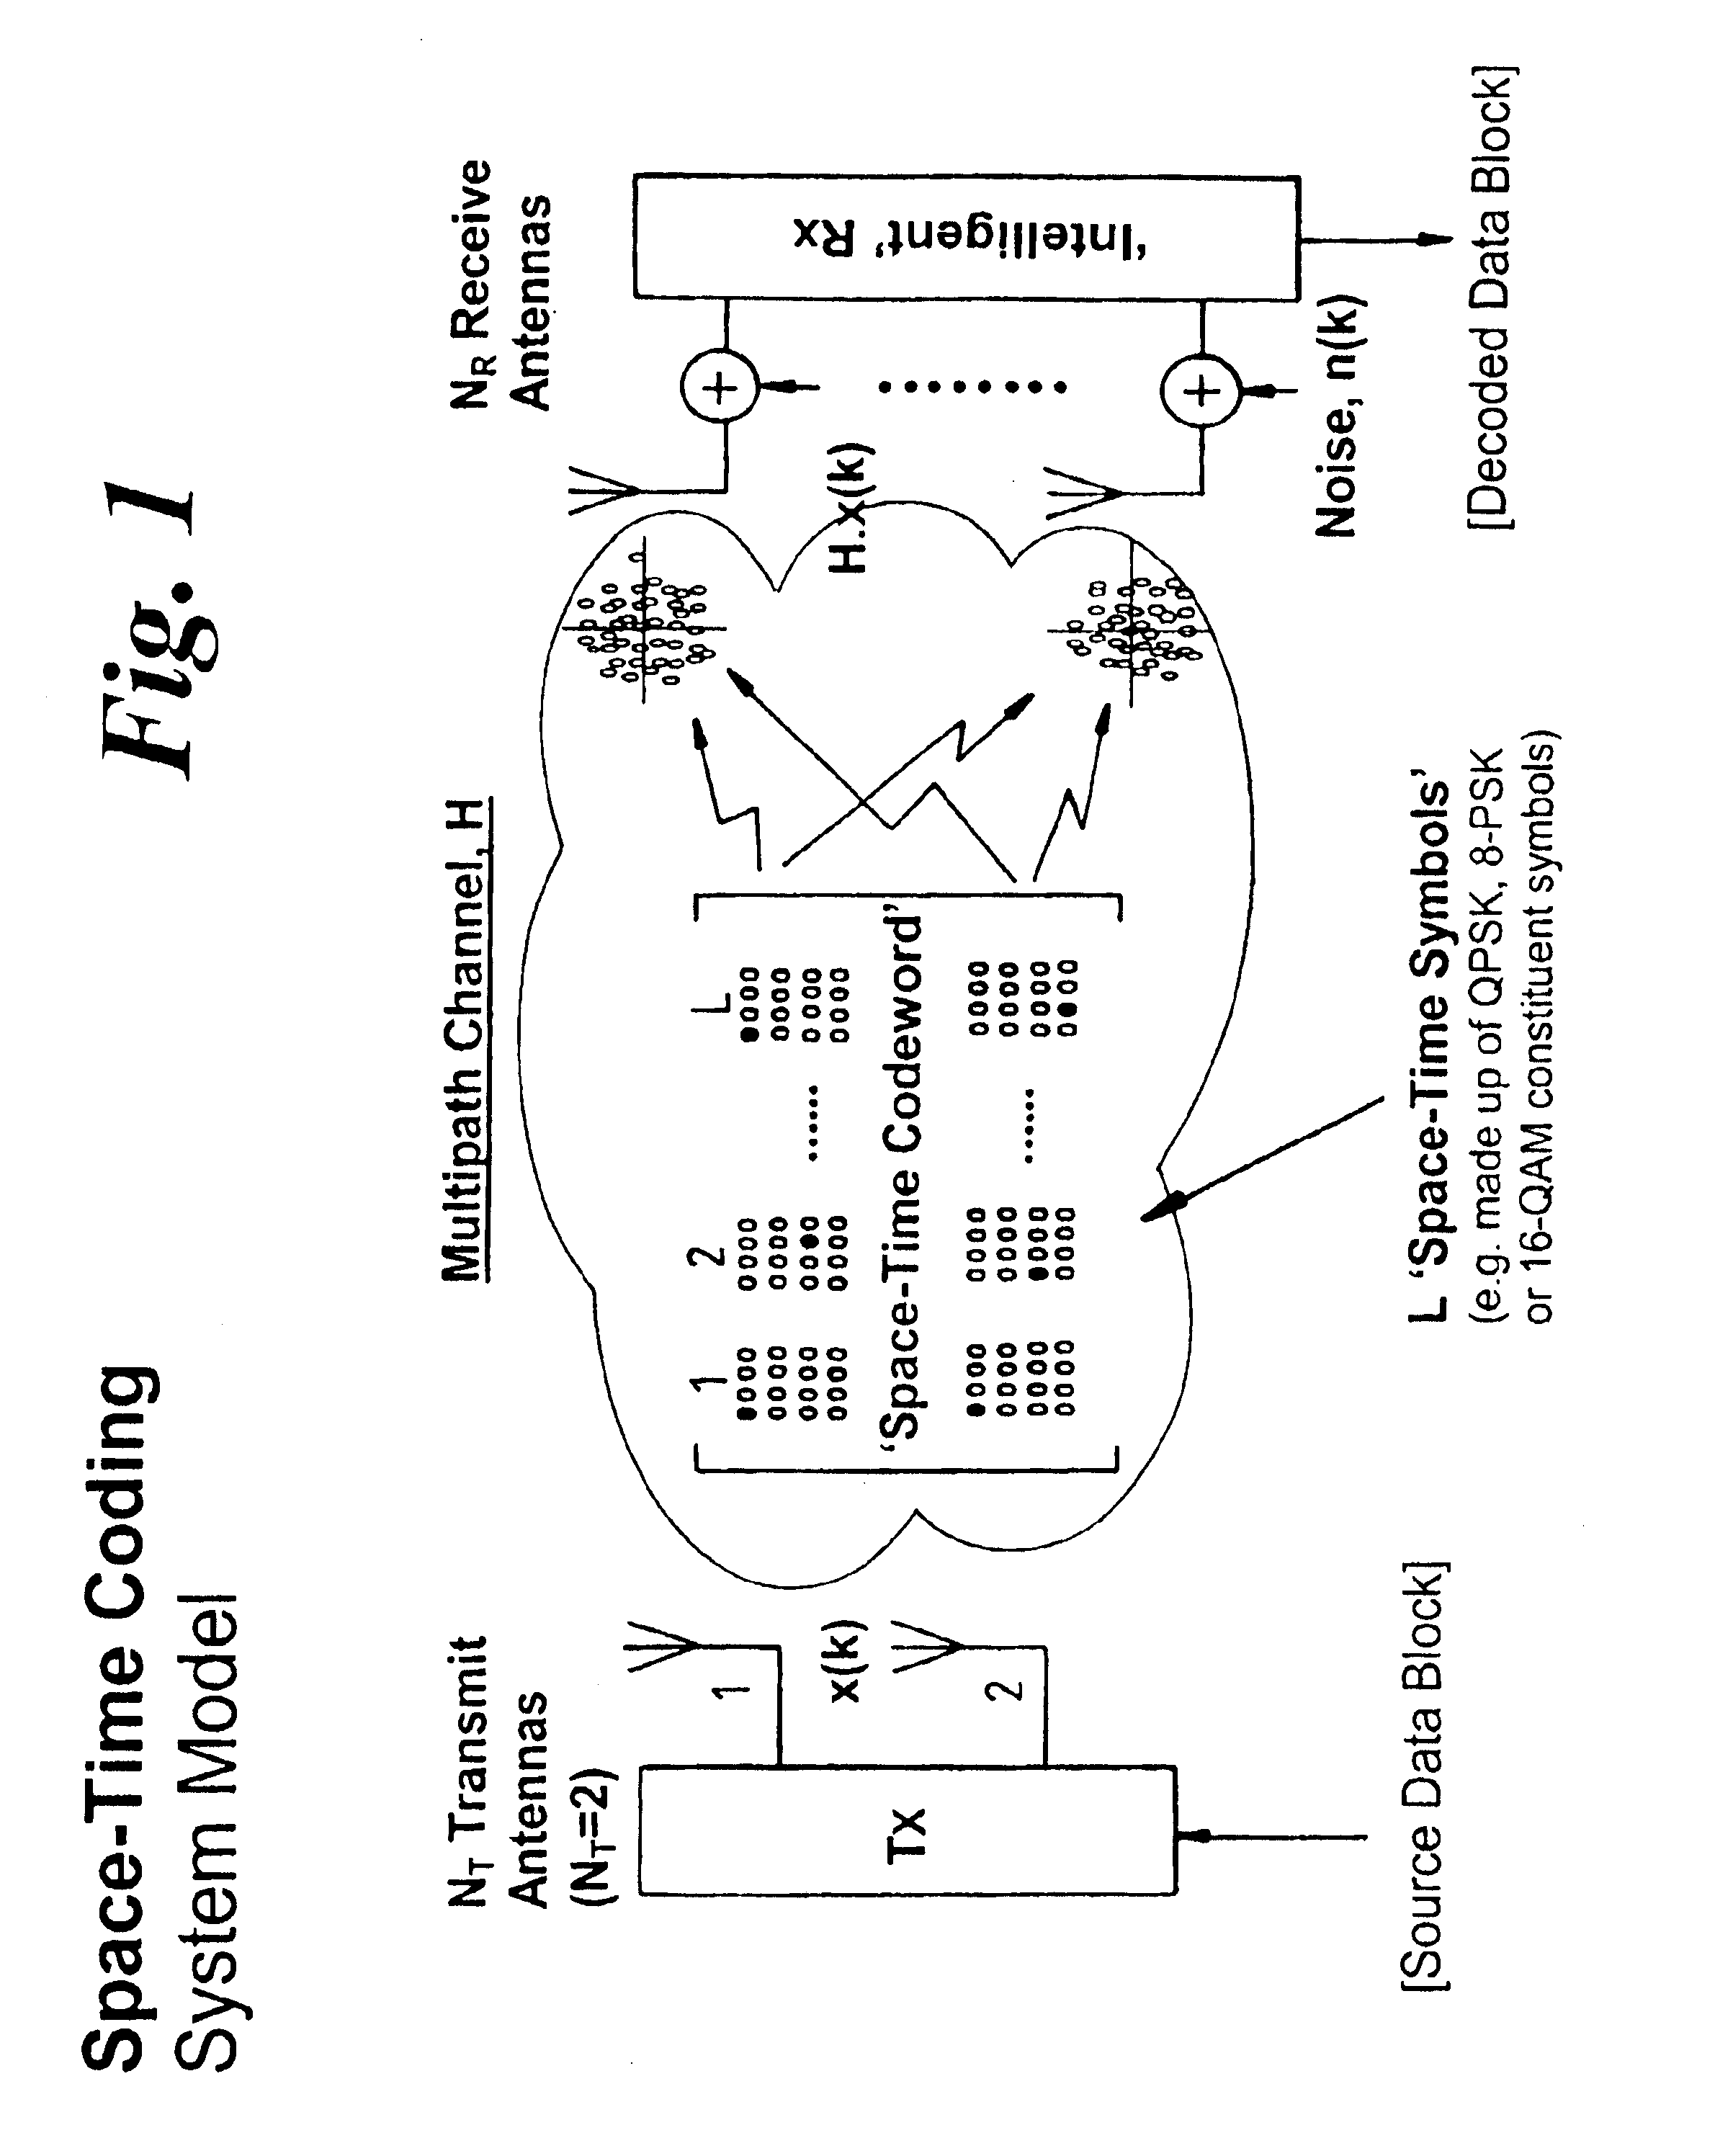 Space-time coding and channel estimation scheme, arrangement and method